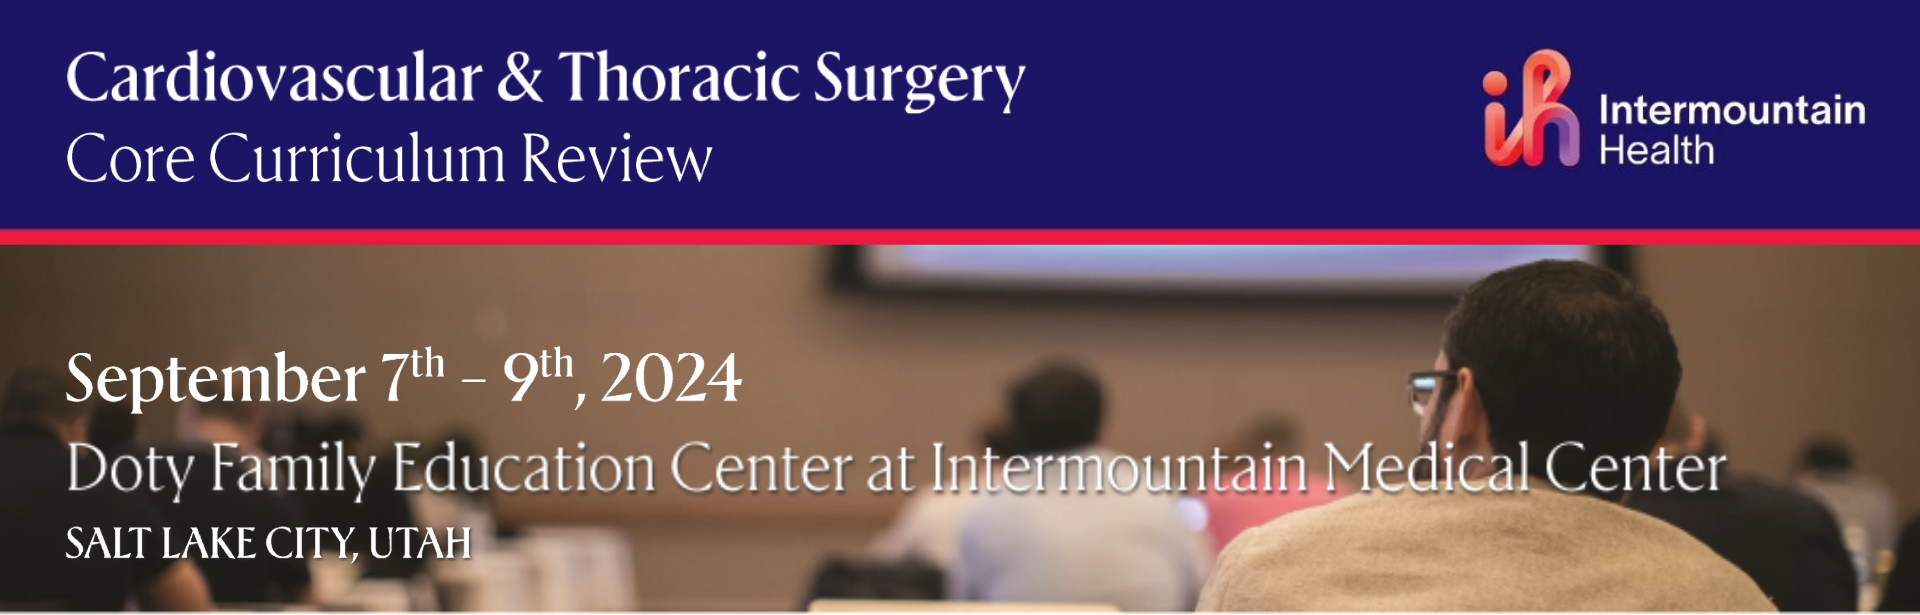 Cardiovascular and Thoracic Surgery Core Curriculum Review Course - 2024 Banner